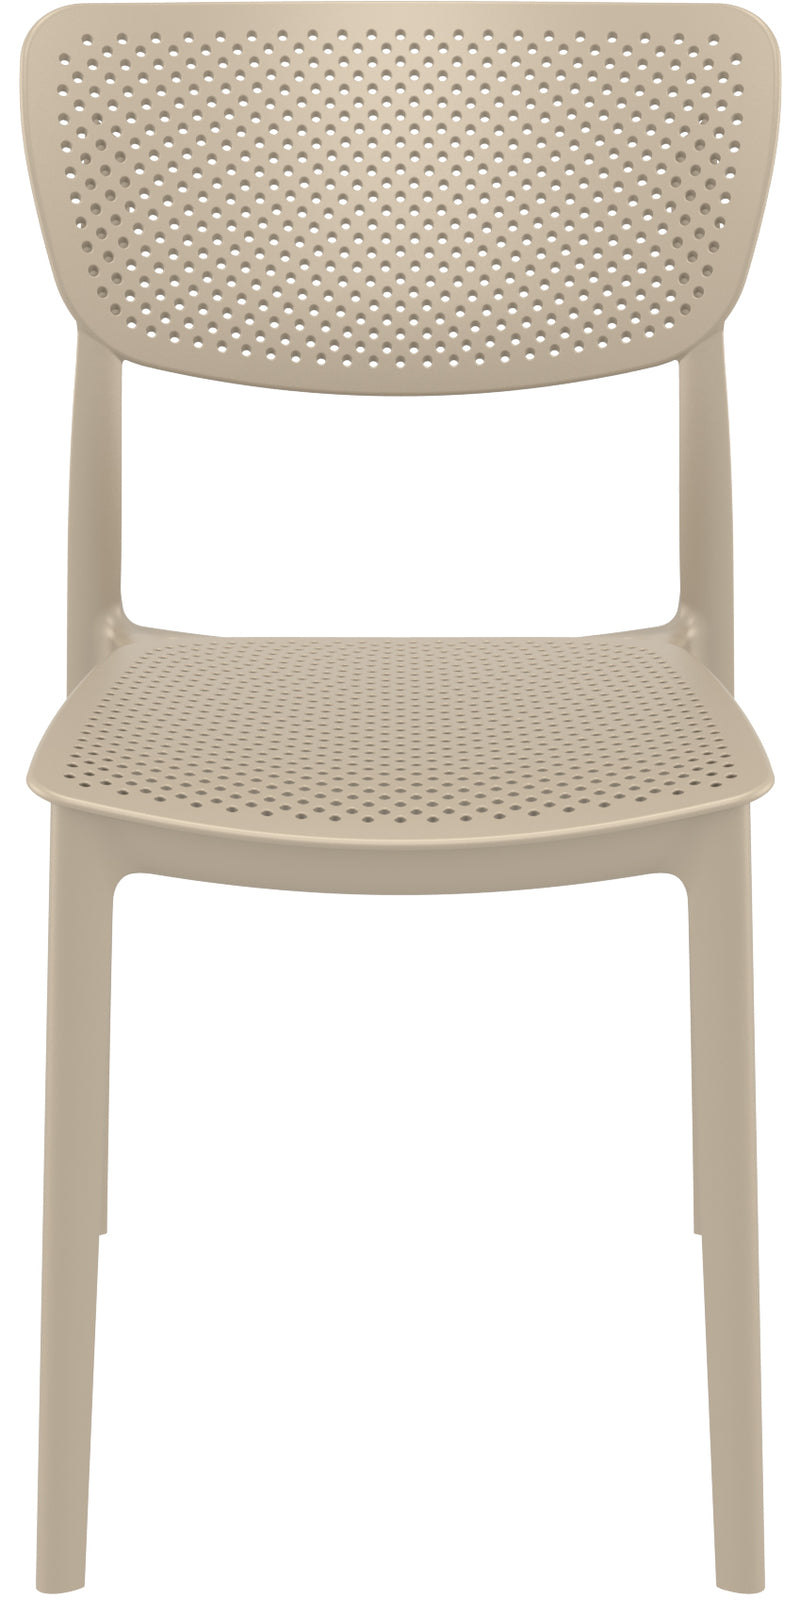 Lucy Chair - Taupe